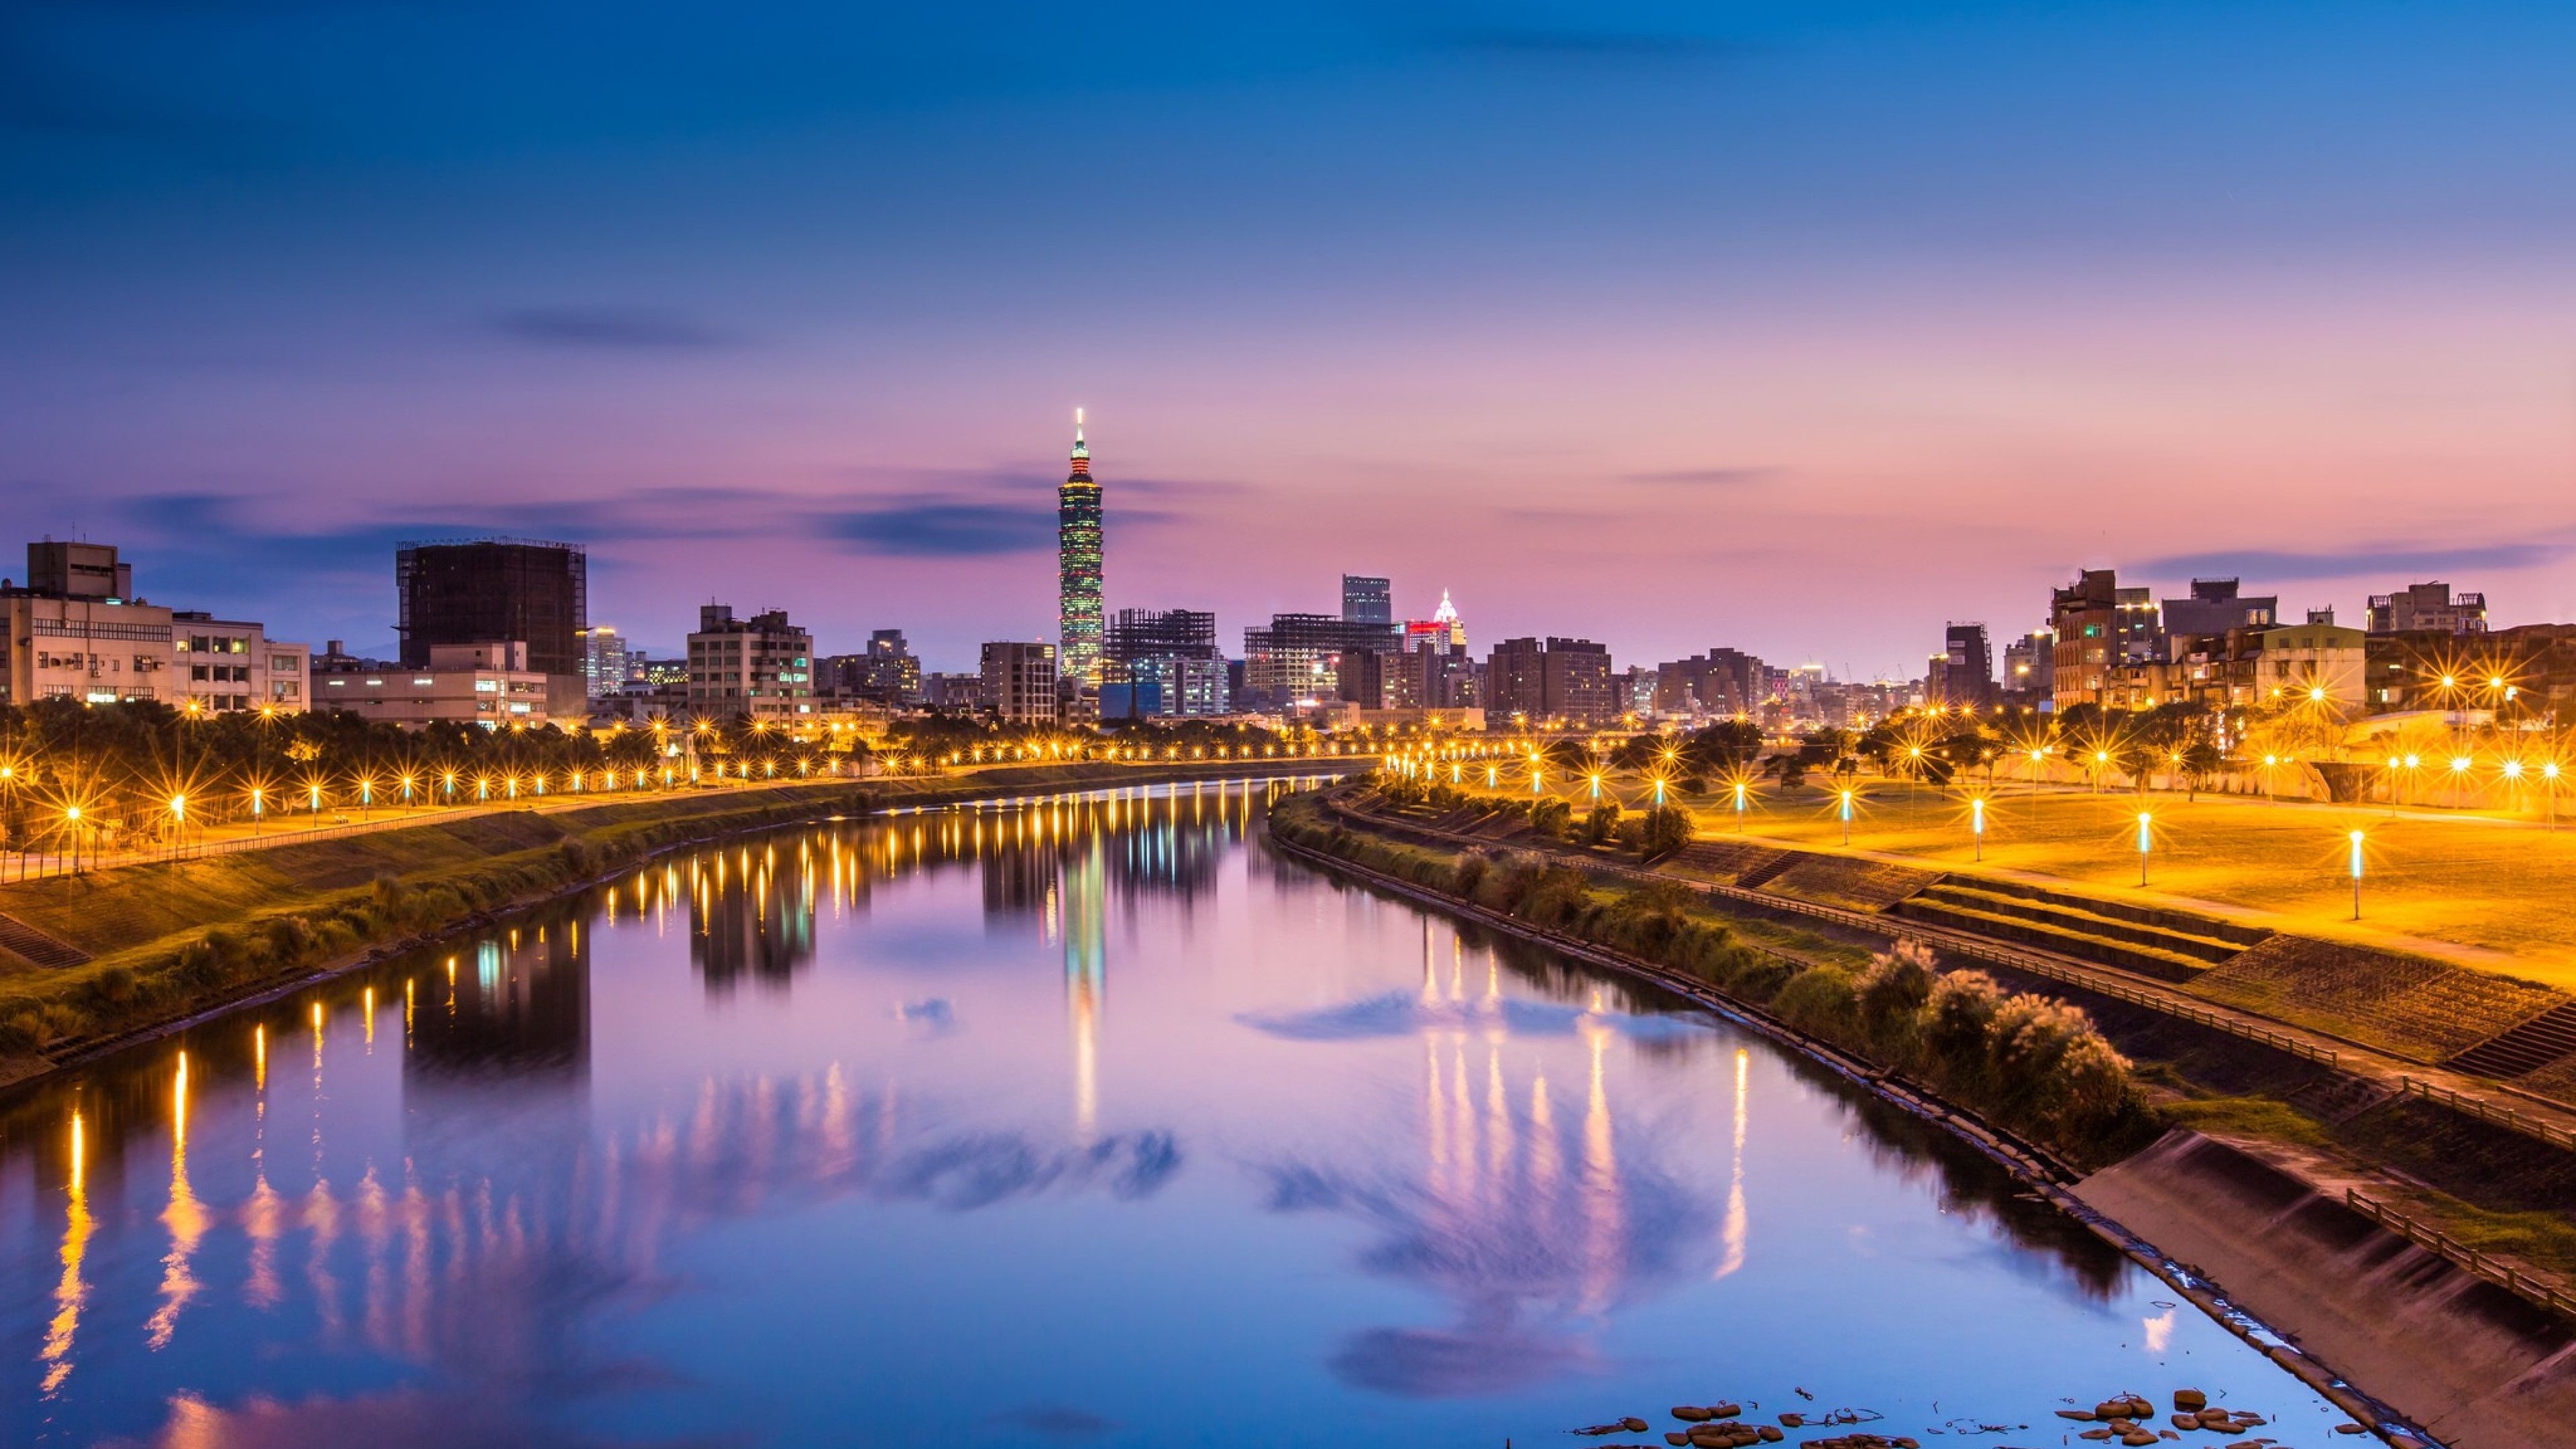 Taiwan wallpaper, Taipei cityscape, Travel photography, Vacation pictures, 3840x2160 4K Desktop